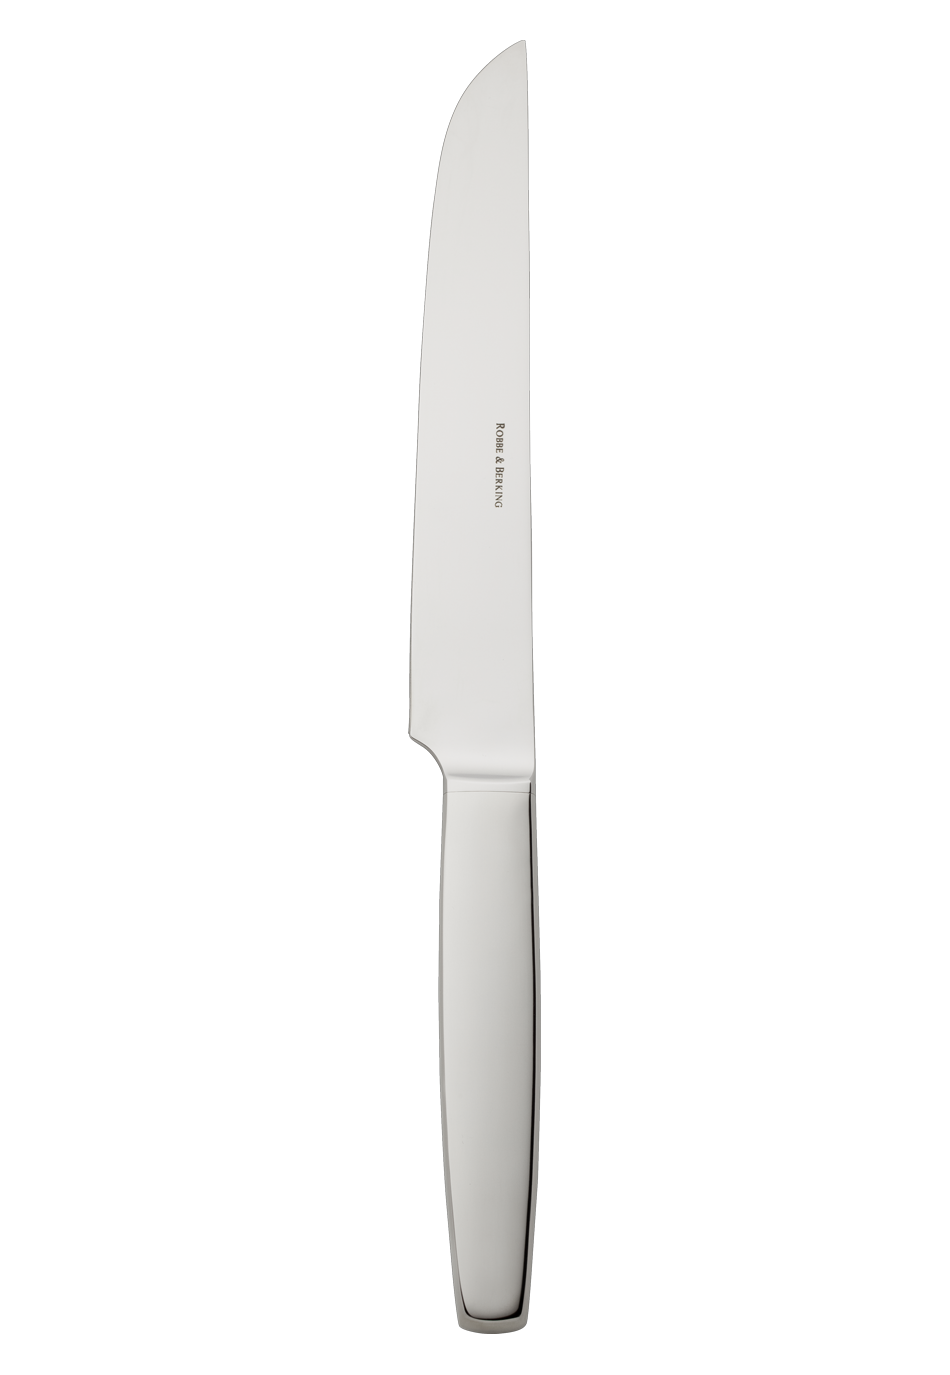 Pax Carving Knife (18/8 stainless steel)